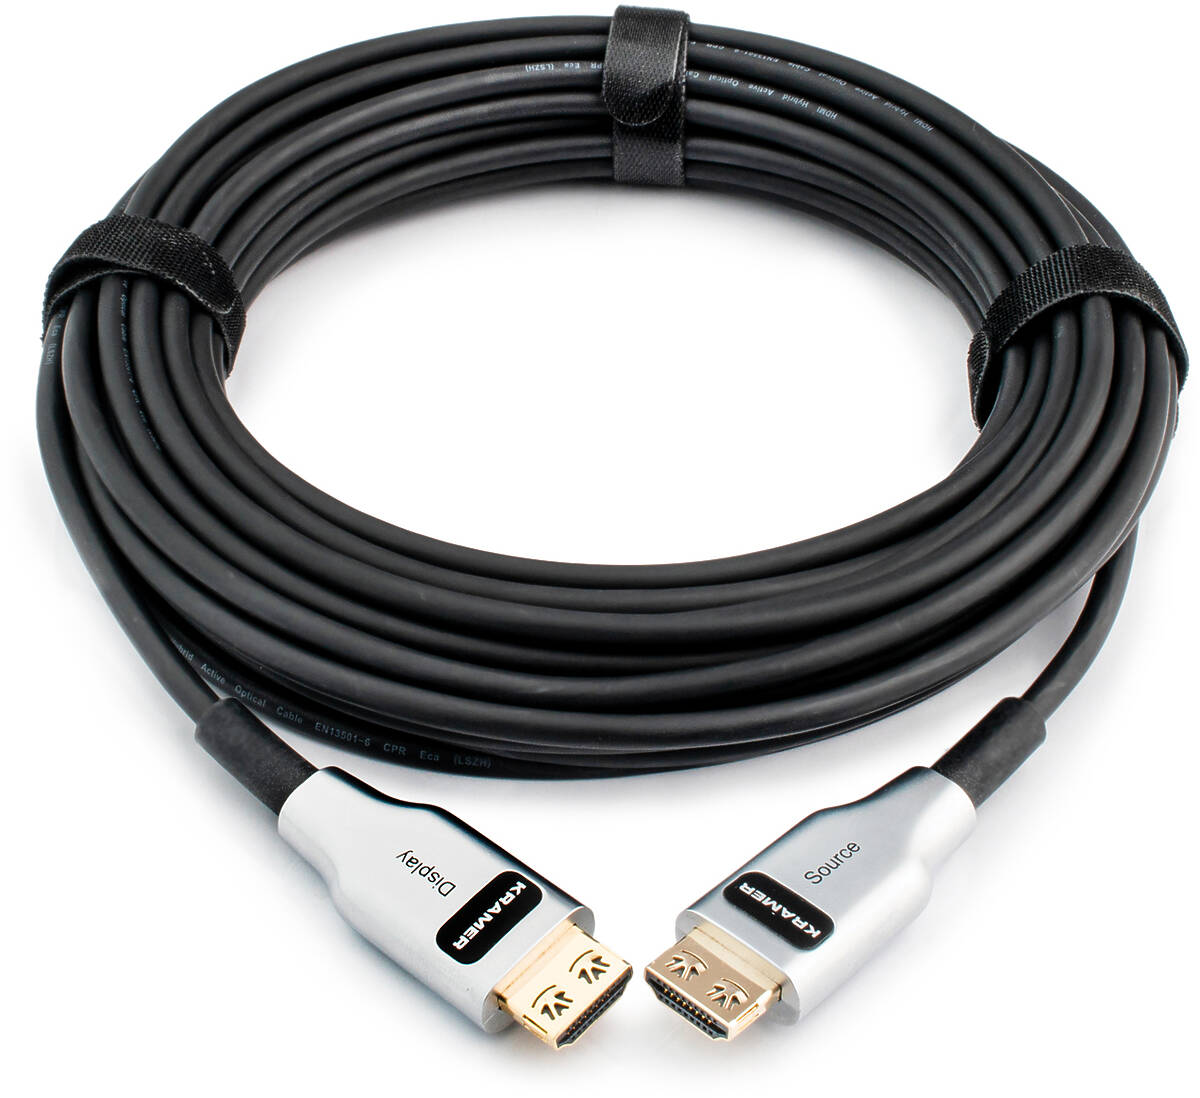 CLS-AOCH/60F-230 70.00m Kramer CLS-AOCH/60F cable product image. Click to enlarge.